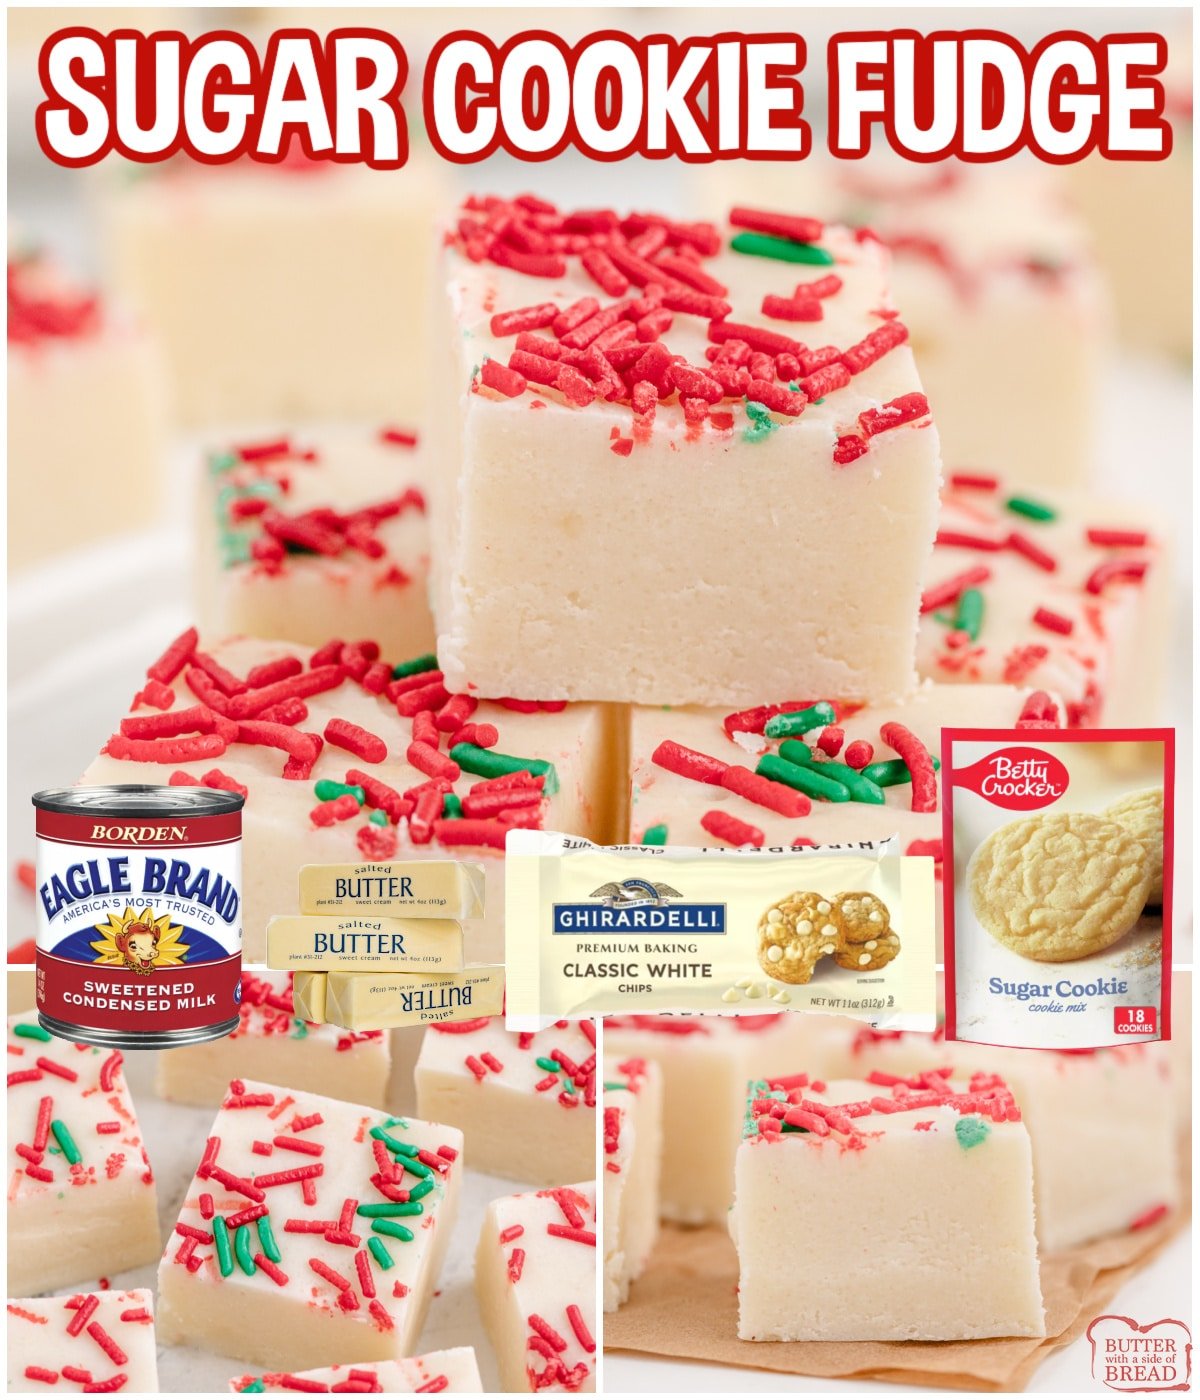 Sugar Cookie Fudge is rich, creamy and made with only 4 ingredients! Easy fudge recipe that tastes just like sugar cookies.